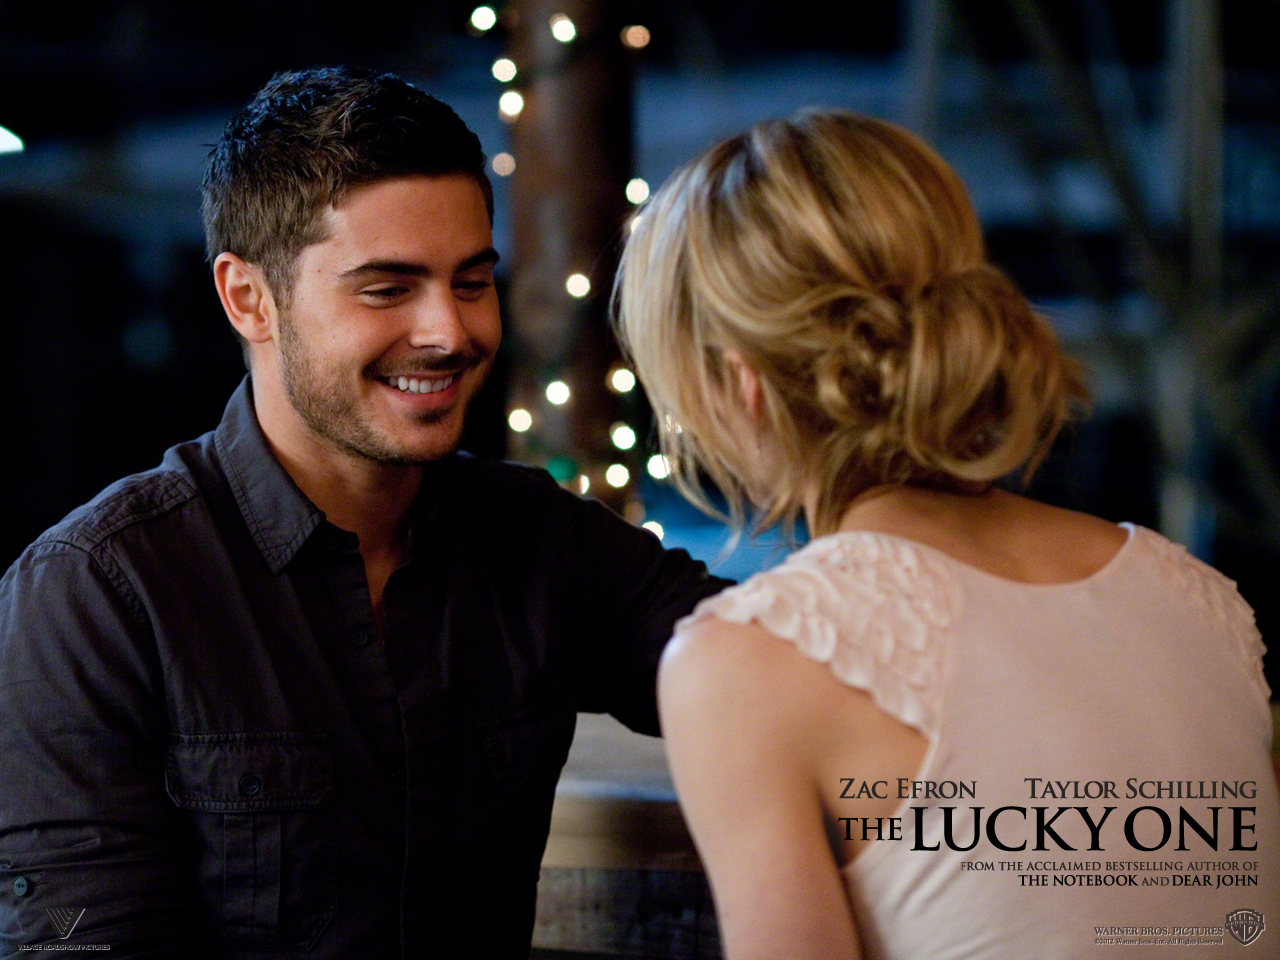 The Lucky One Backgrounds, Compatible - PC, Mobile, Gadgets| 1280x960 px